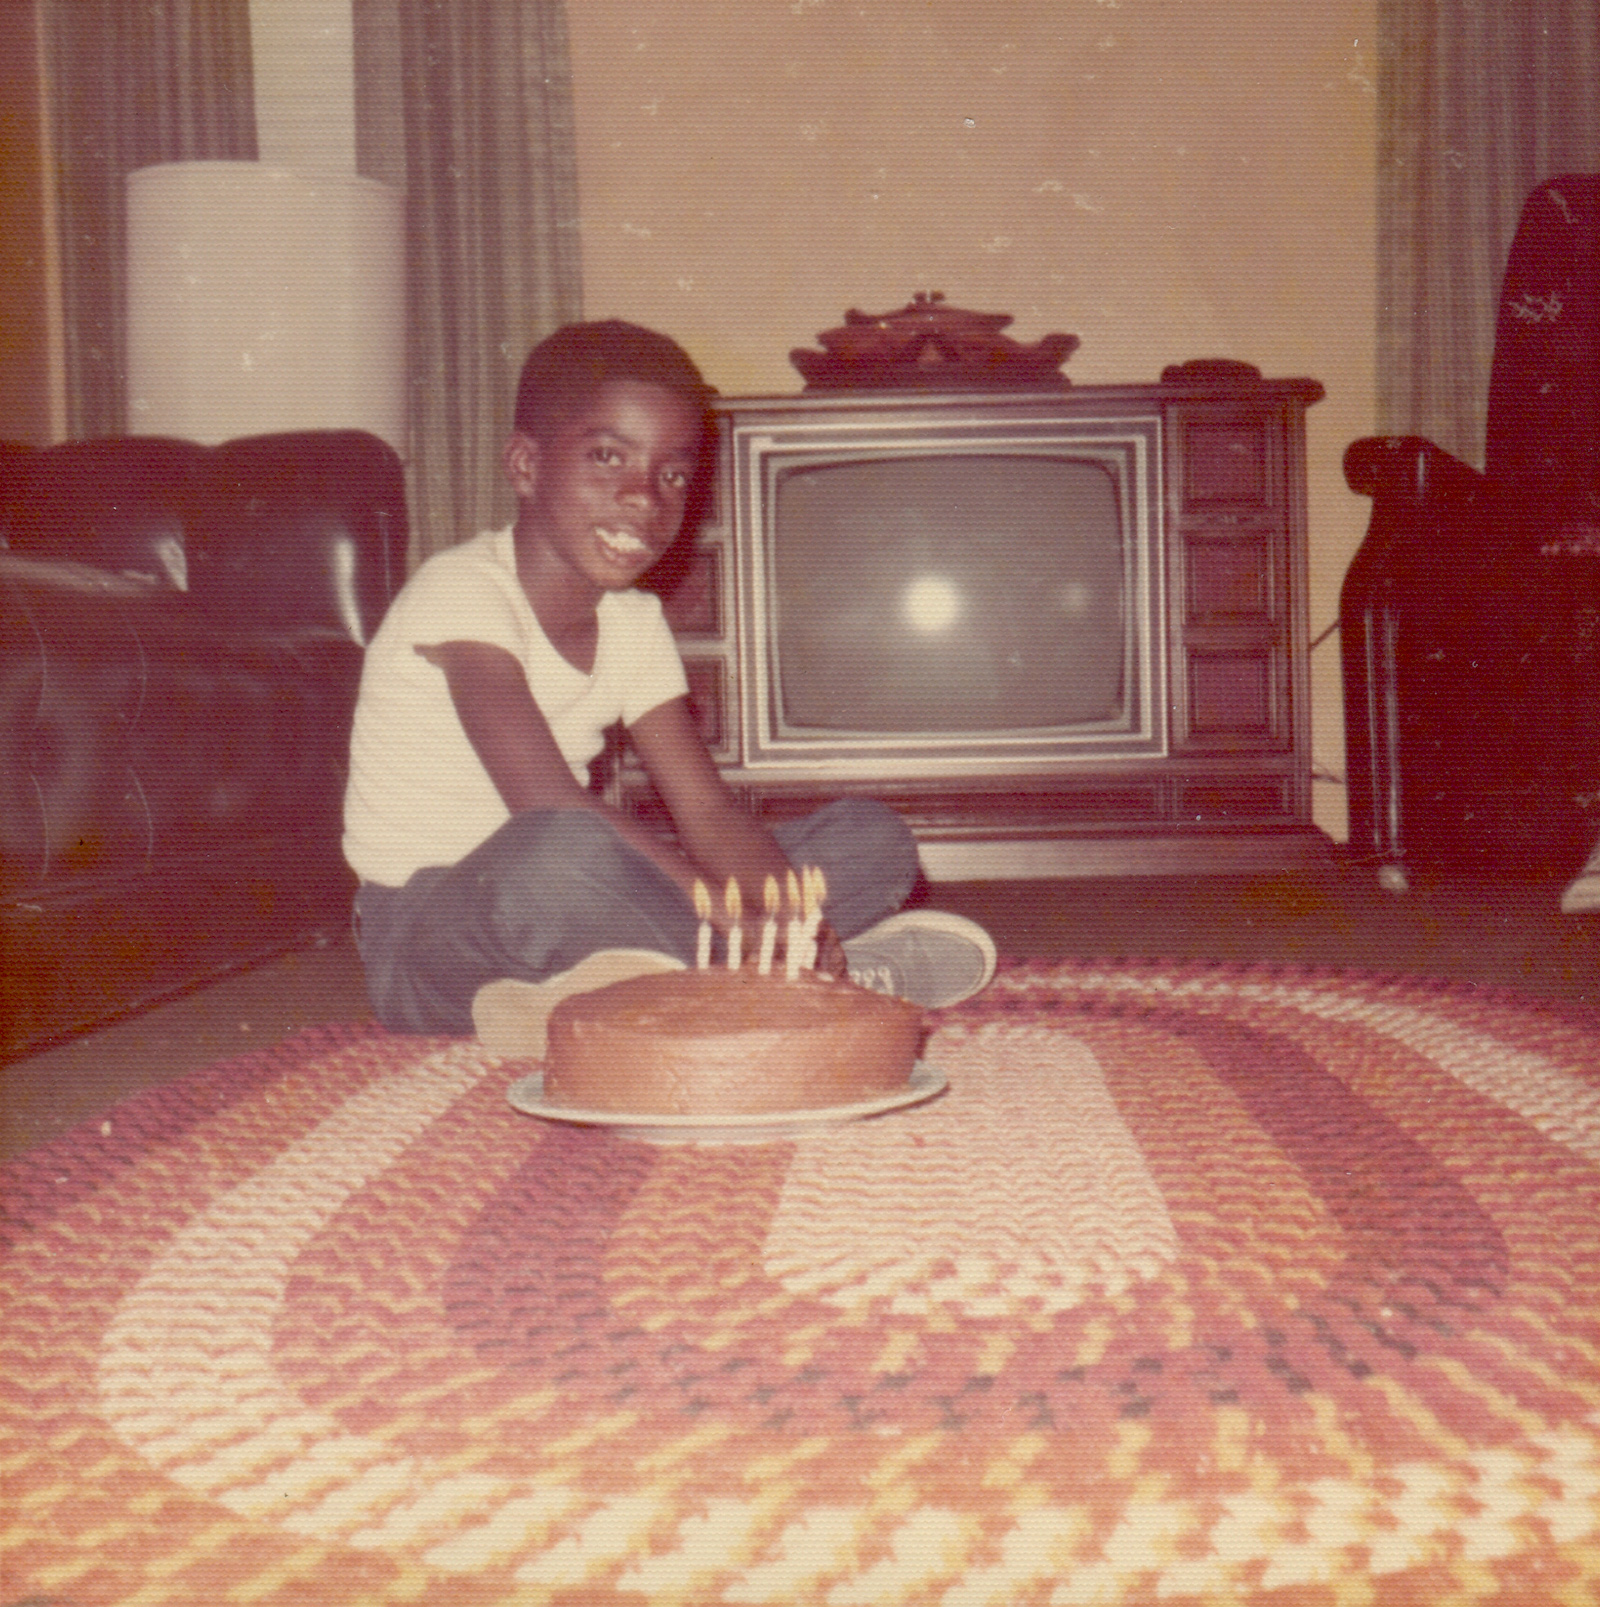 A young boy in front of a TV